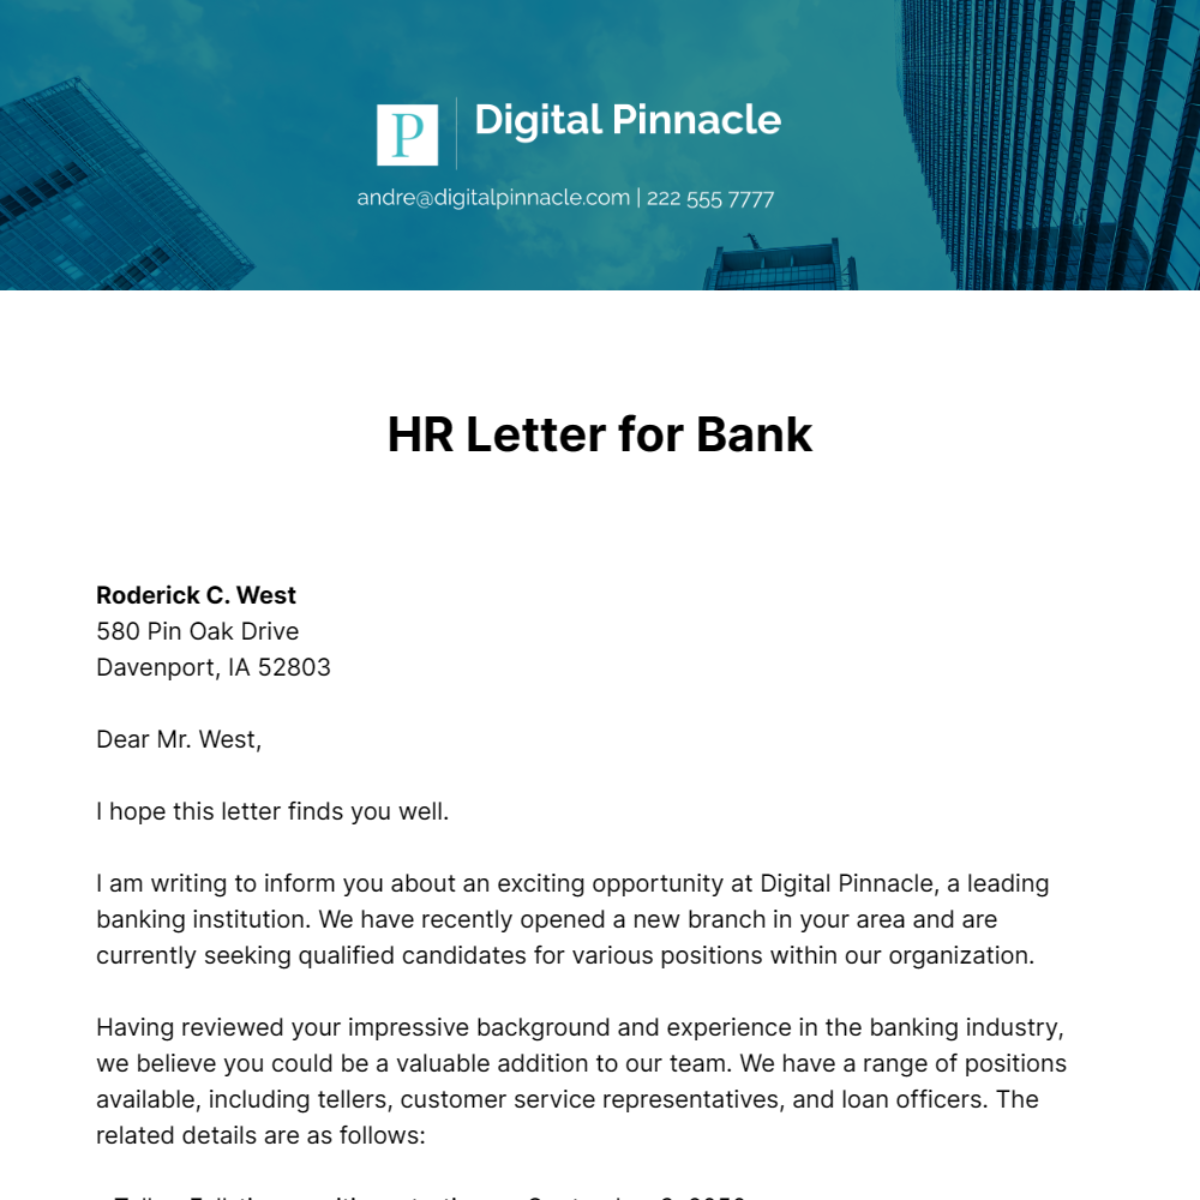 HR Letter for Bank Template